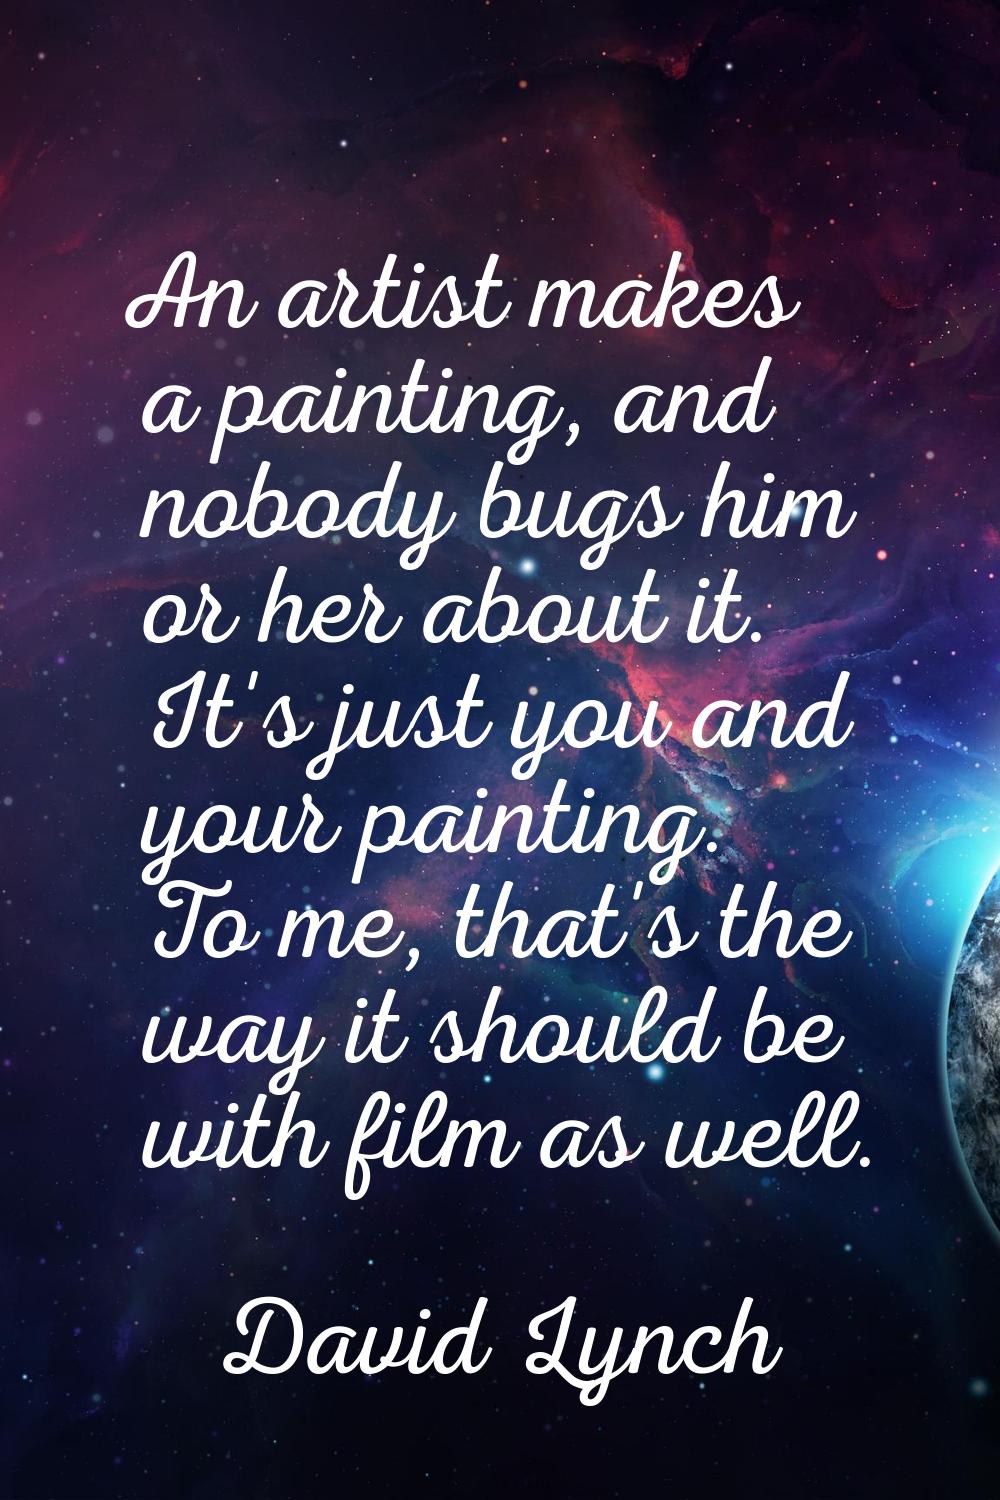 An artist makes a painting, and nobody bugs him or her about it. It's just you and your painting. T